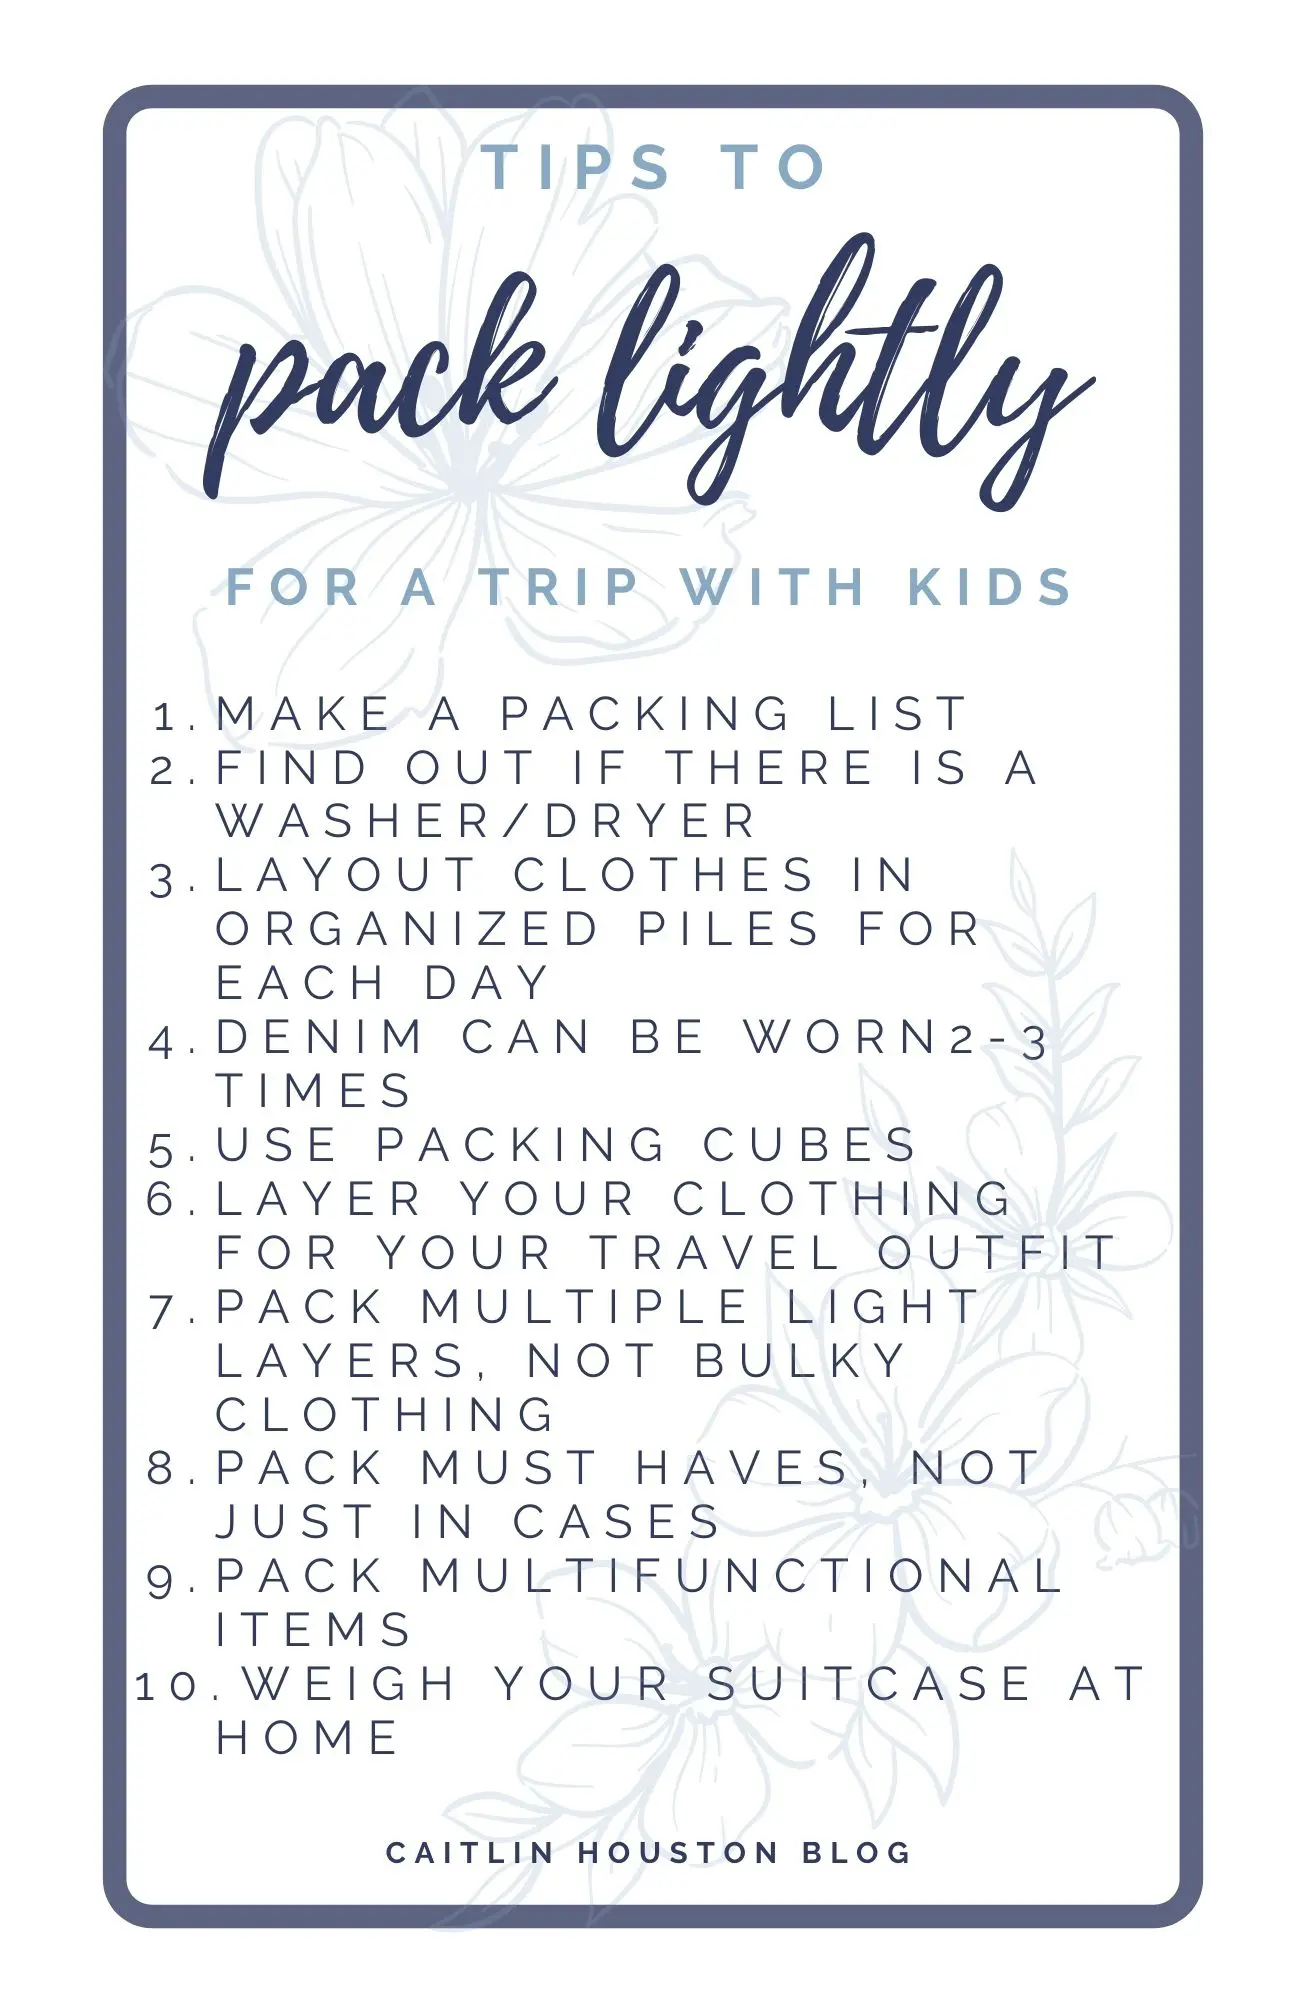 Tips to Pack Lighting for a Trip with Kids